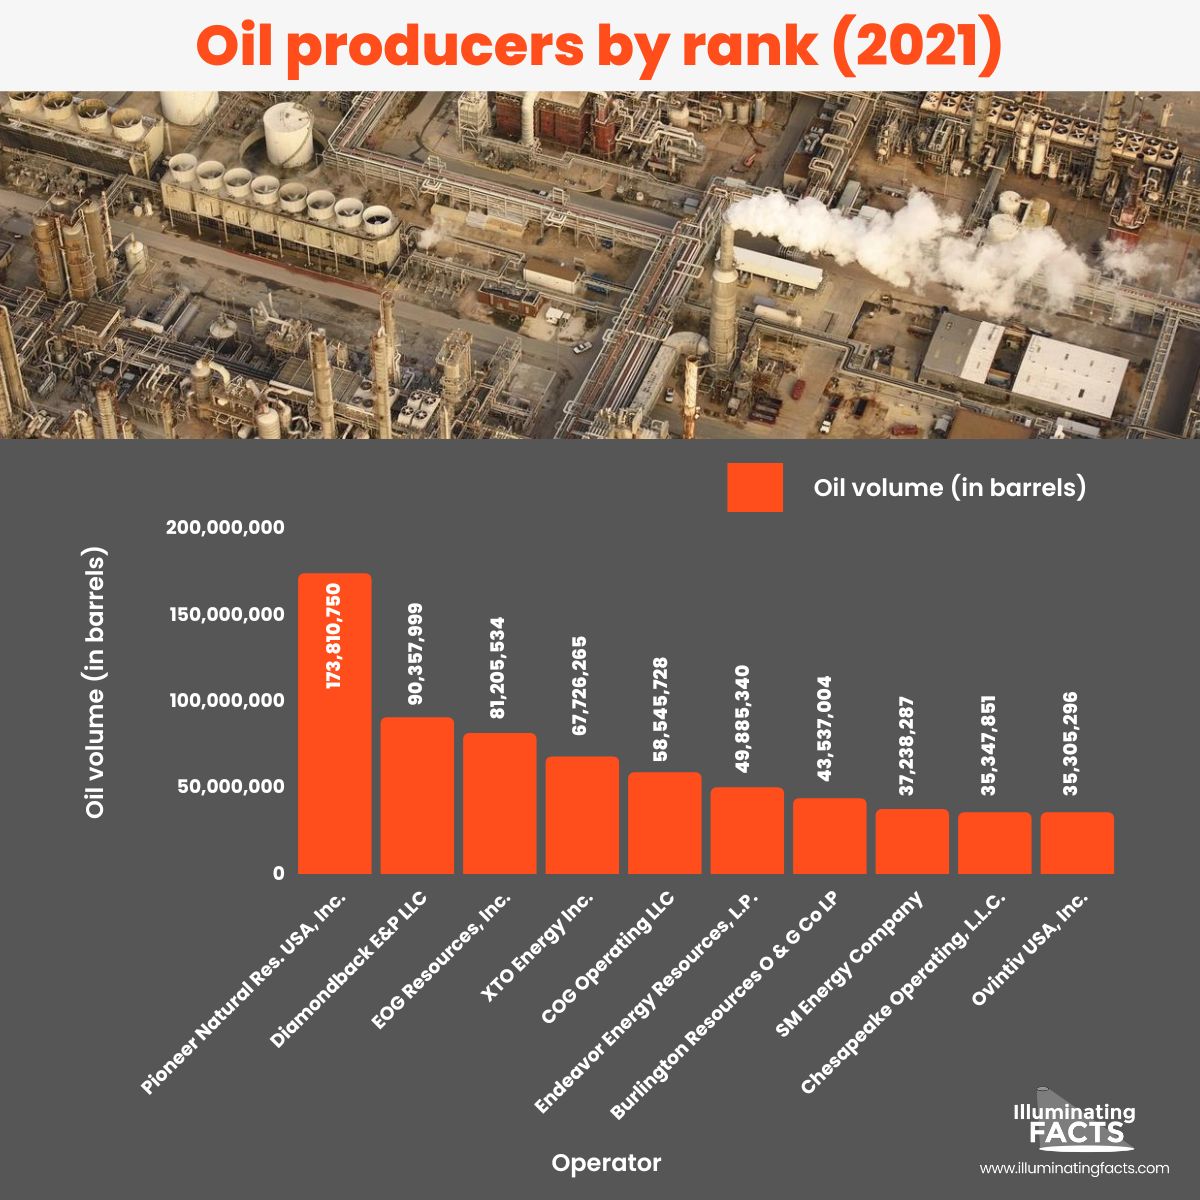 Oil producers by rank (2021)